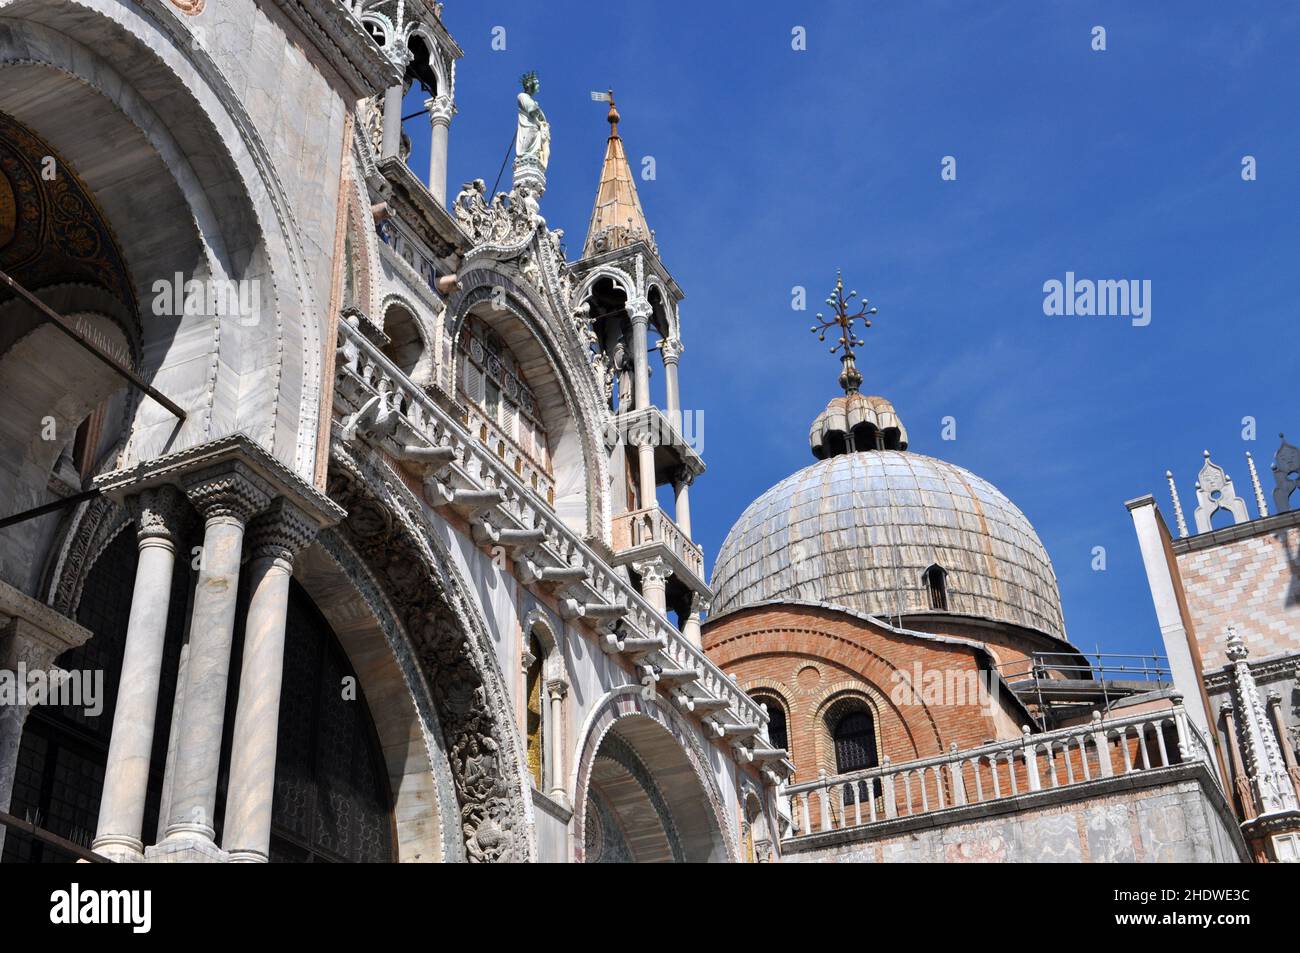 cathedral, sacred architecture, st mark's cathedral, cathedrals, sacred architectures, st. mark's cathedrals Stock Photo